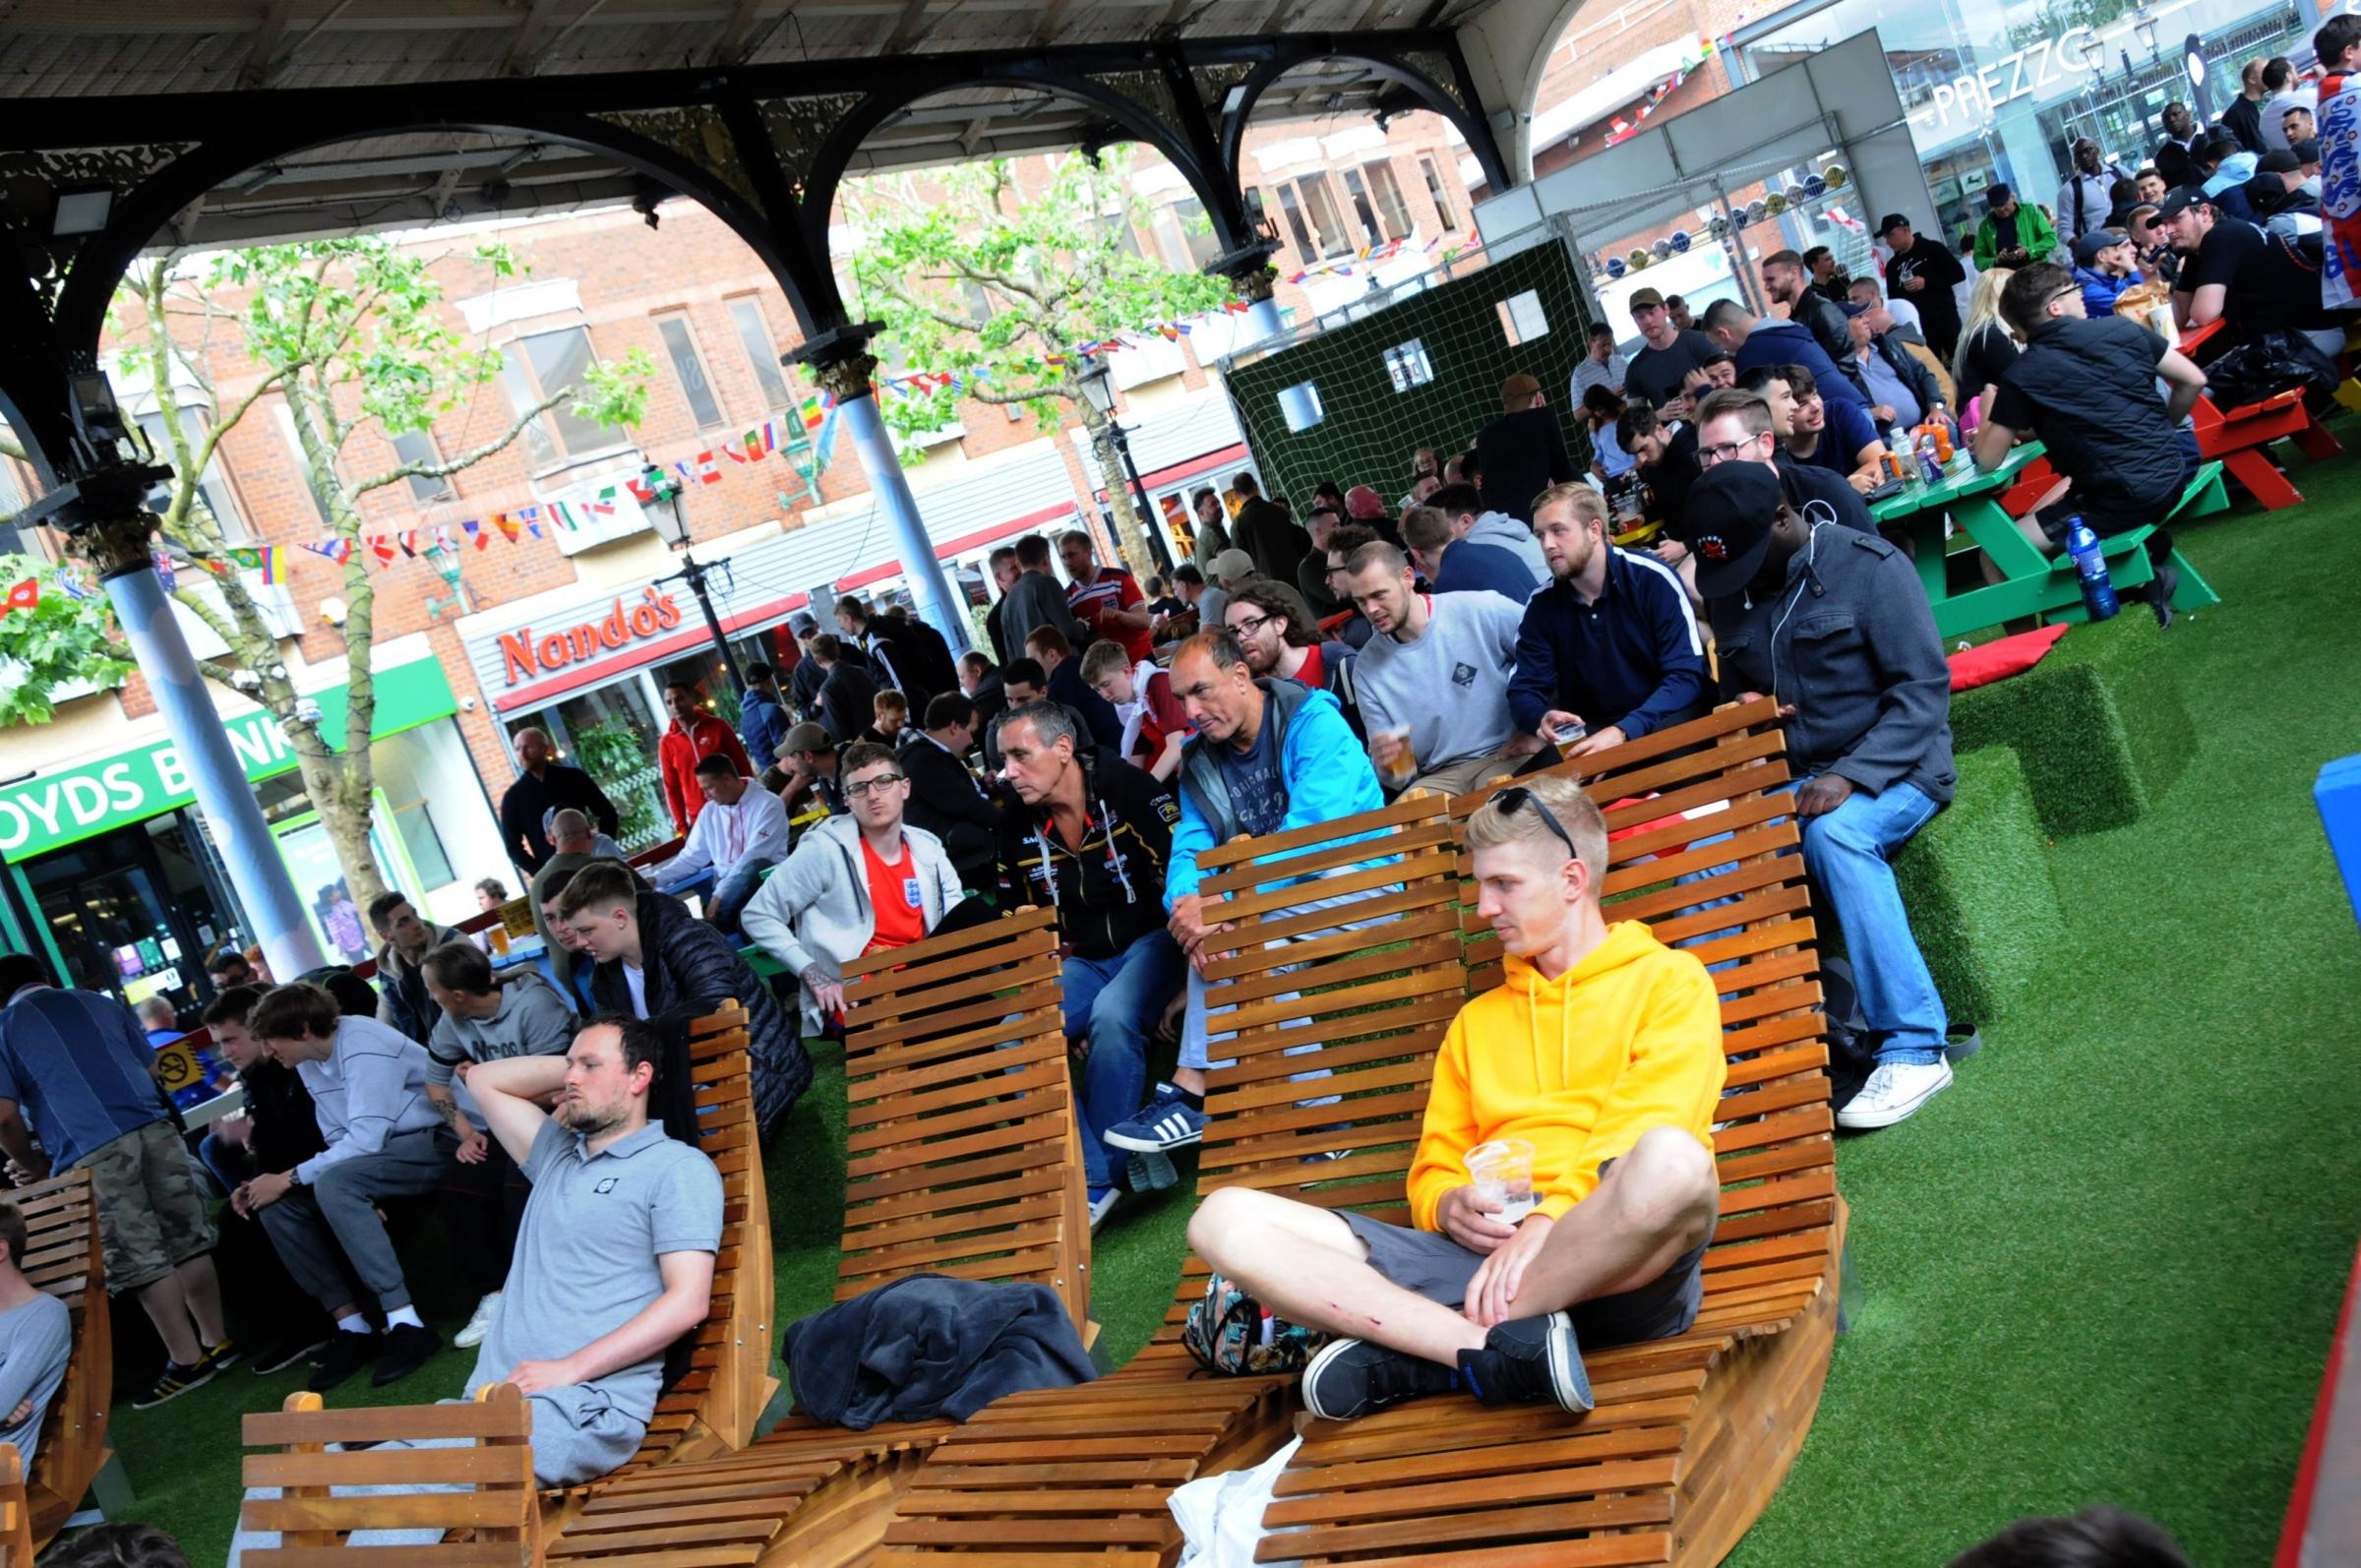 Golden square big screen up for world cup England supporters watch Tunisia Game.